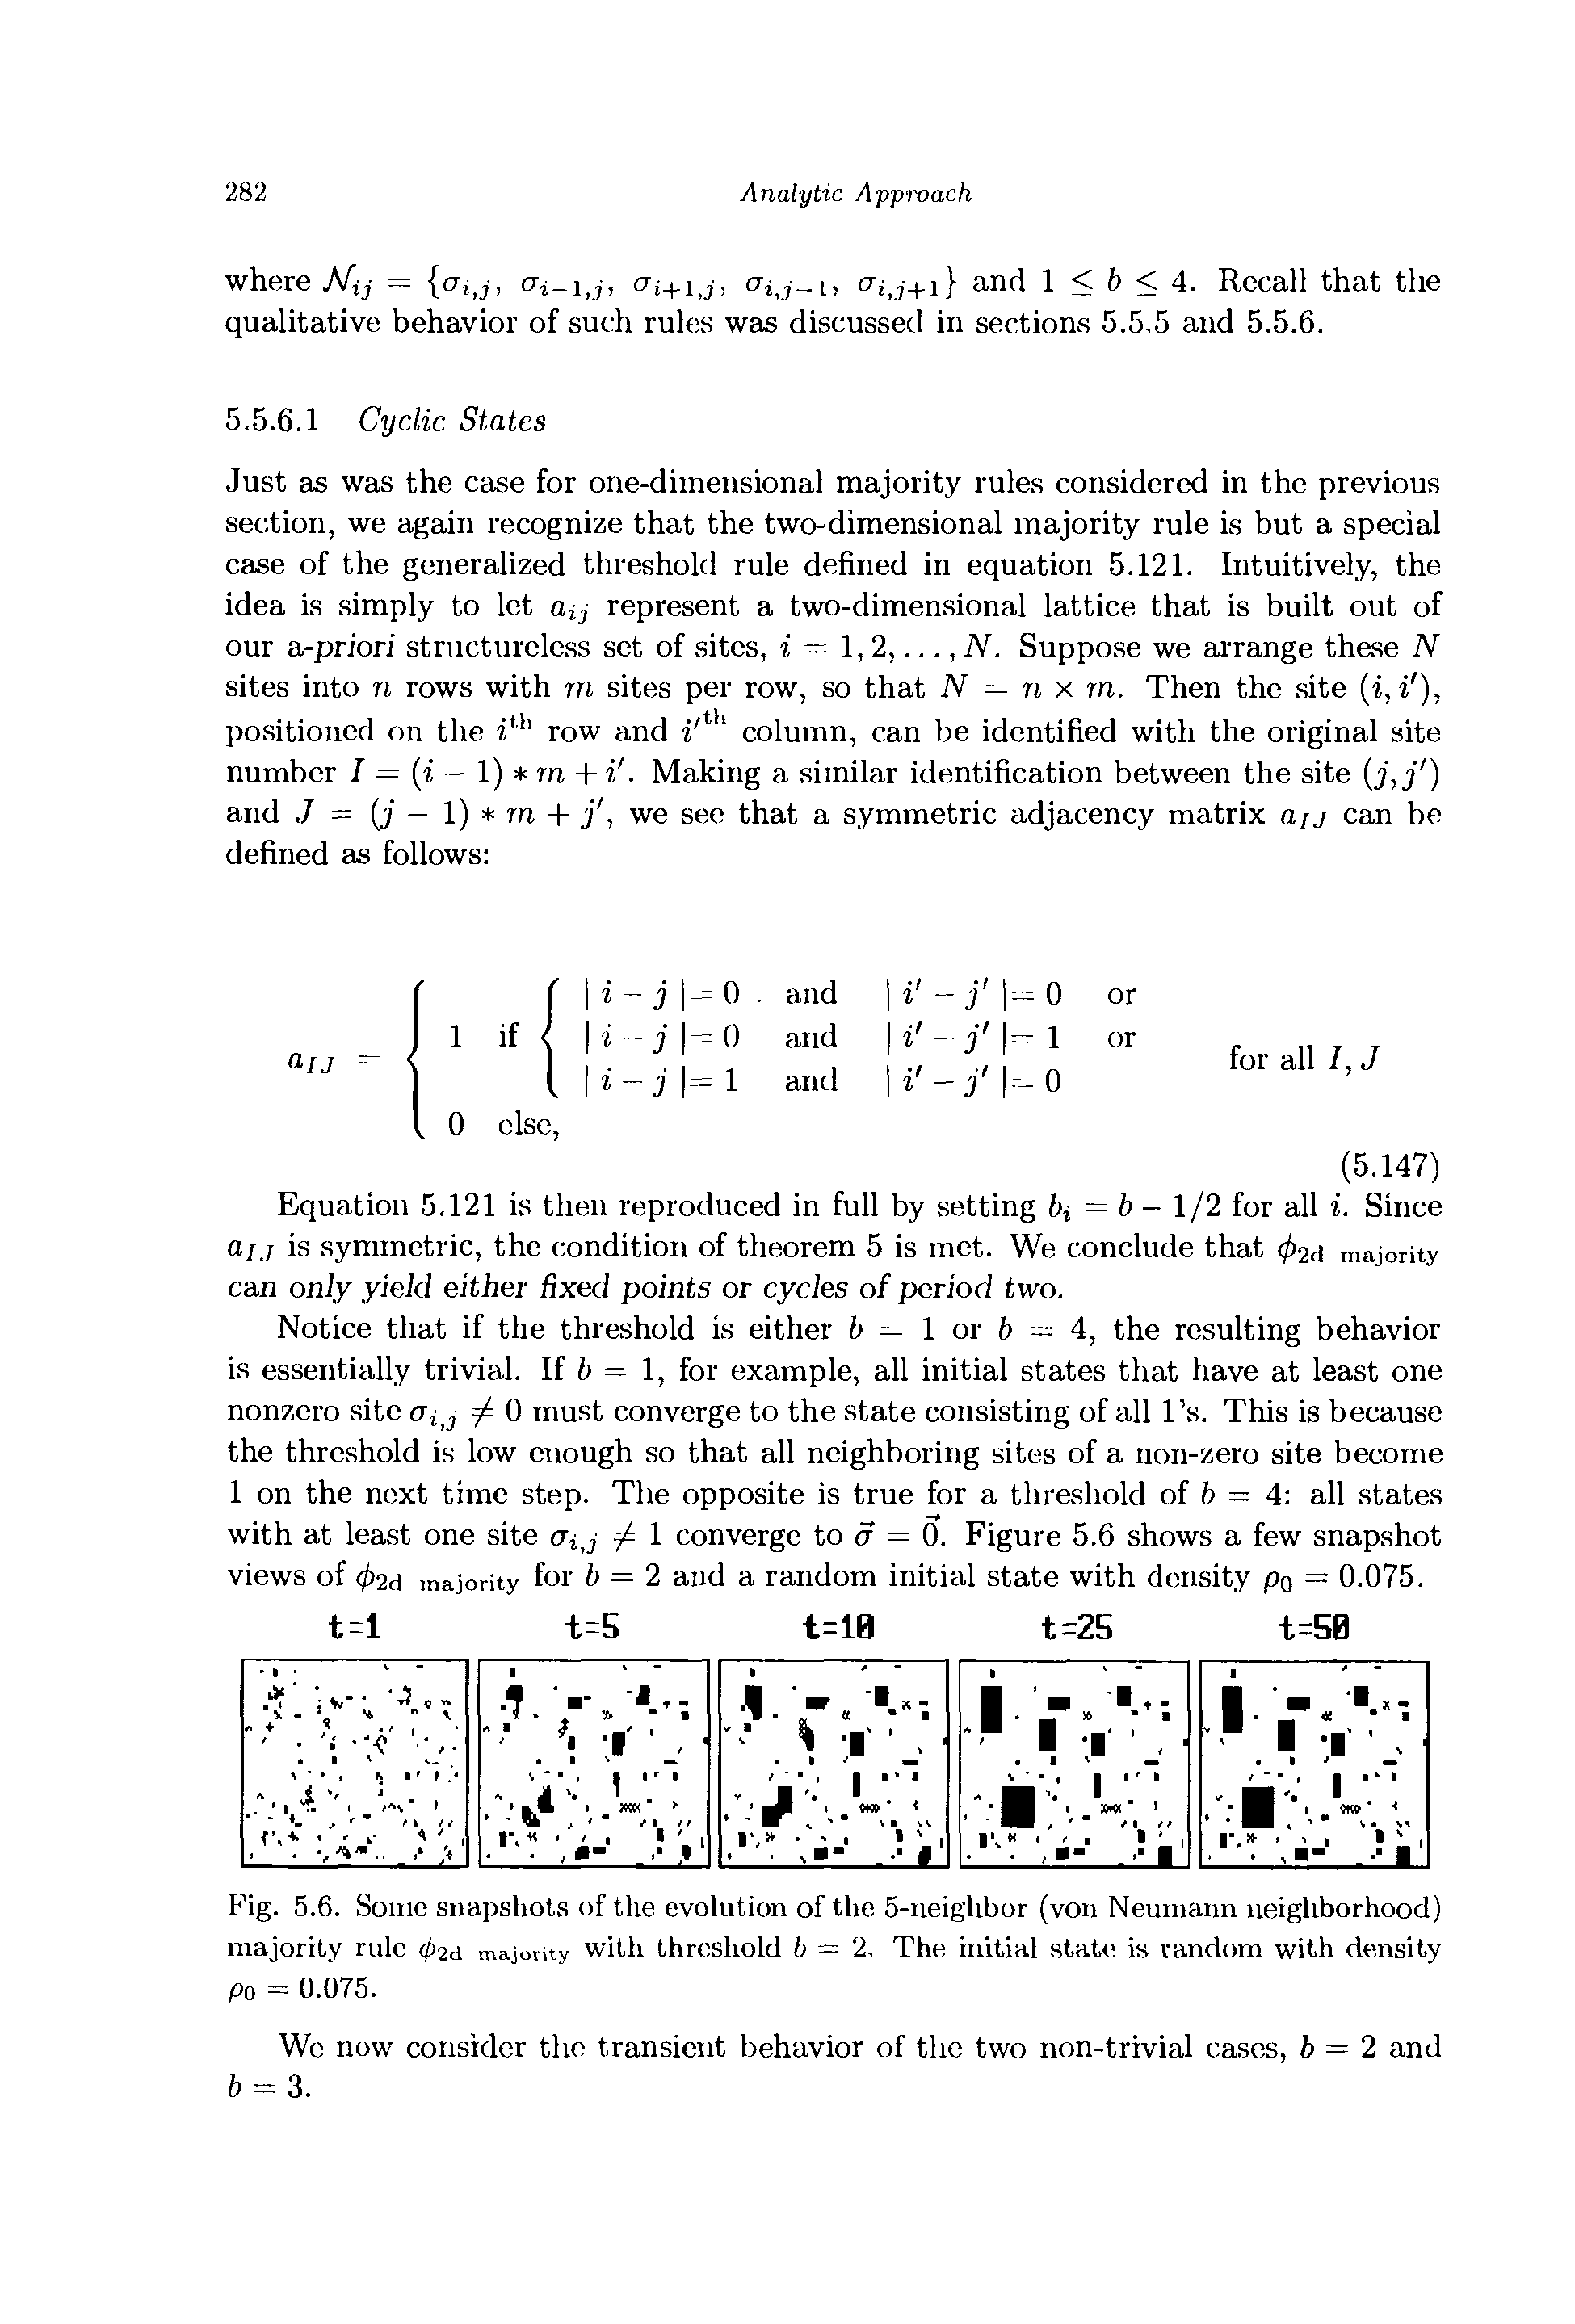 Fig. 5.6. Some snapshots of the evolution of the 5-neighbor (von Neumann neighborhood) majority rule (p2d majority with threshold b = 2, The initial state is random with density po = 0.075.